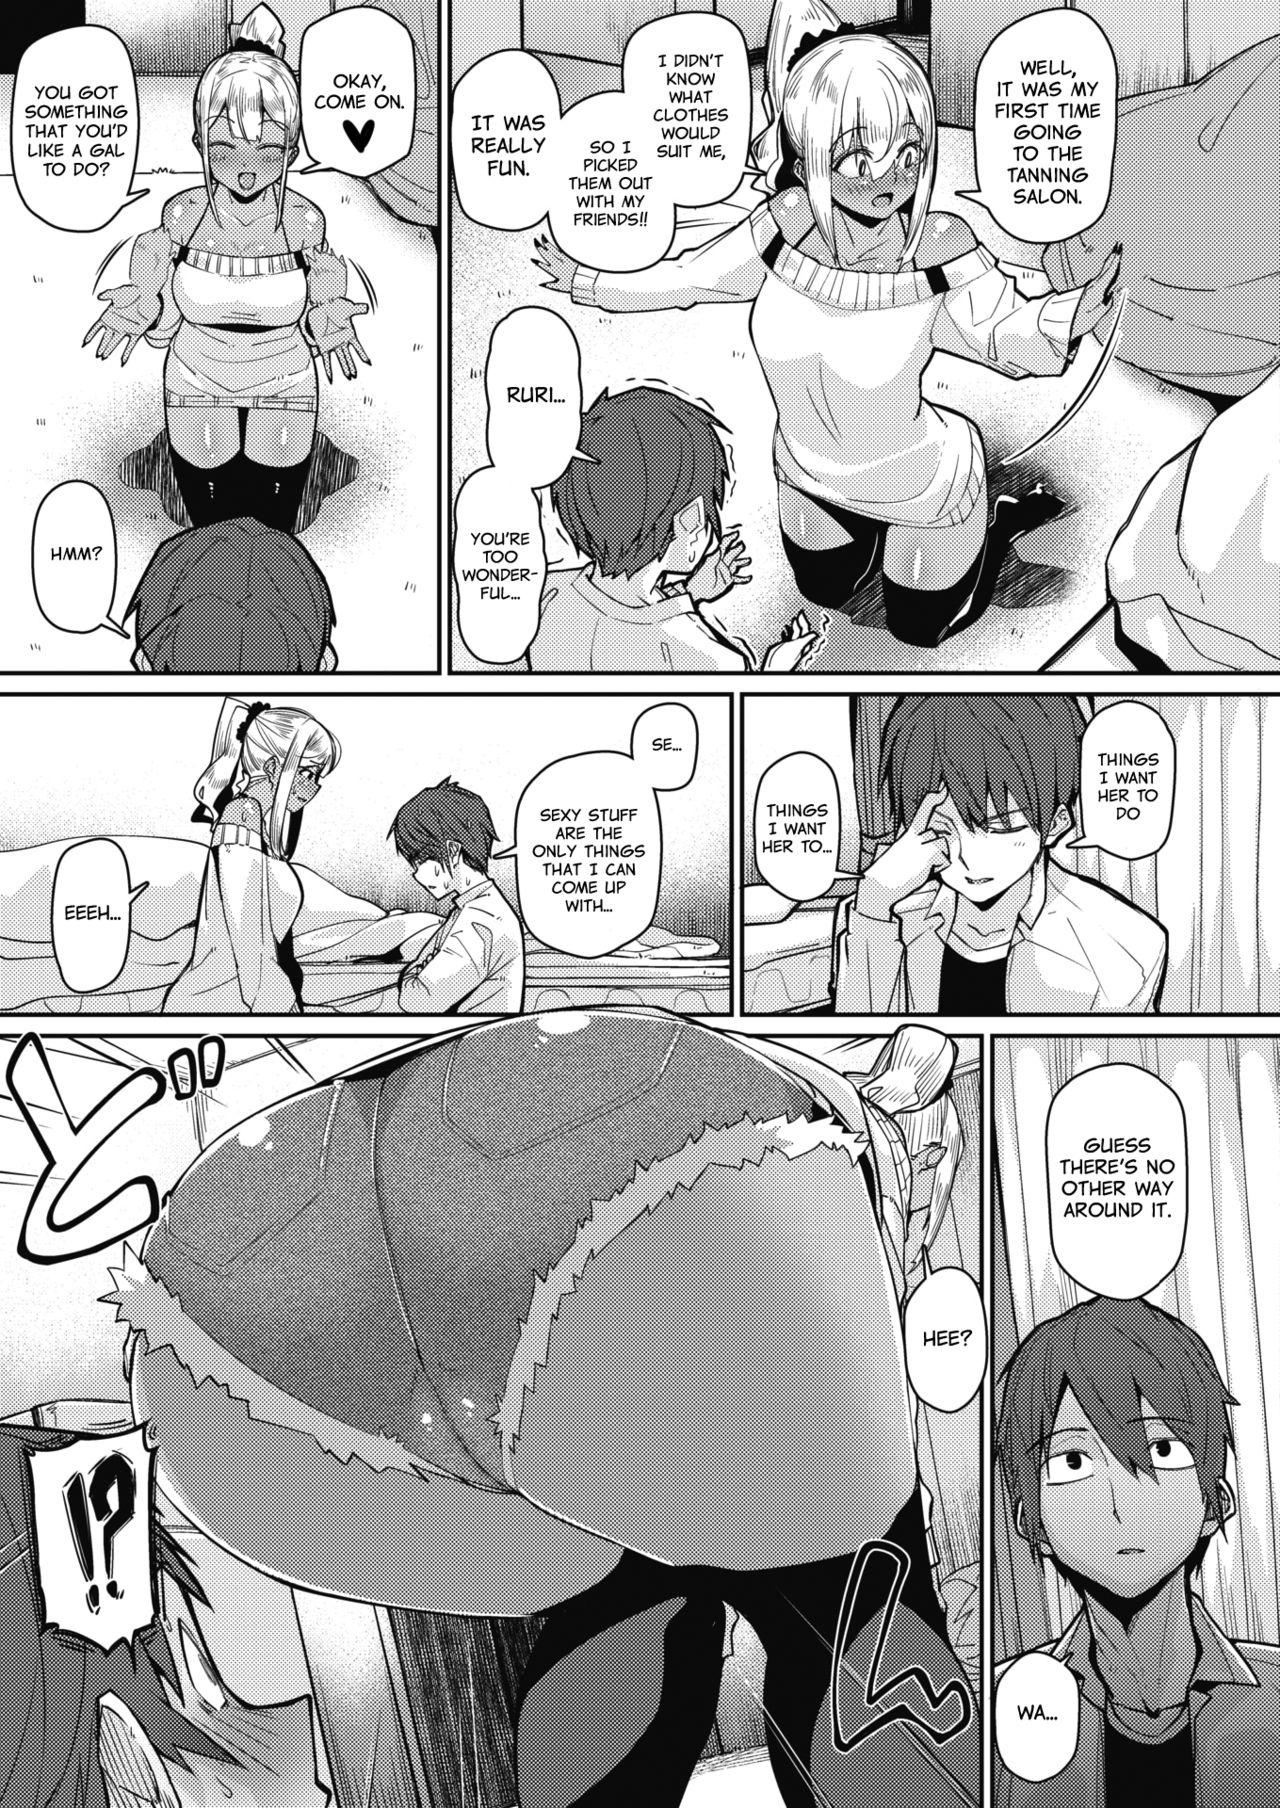 Pussylicking Gekkan "The Bitch" o Mita Onna no Hannou ni Tsuite | About the Reaction of the Girl Who Saw "The Bitch Monthly" Free Fuck - Page 5